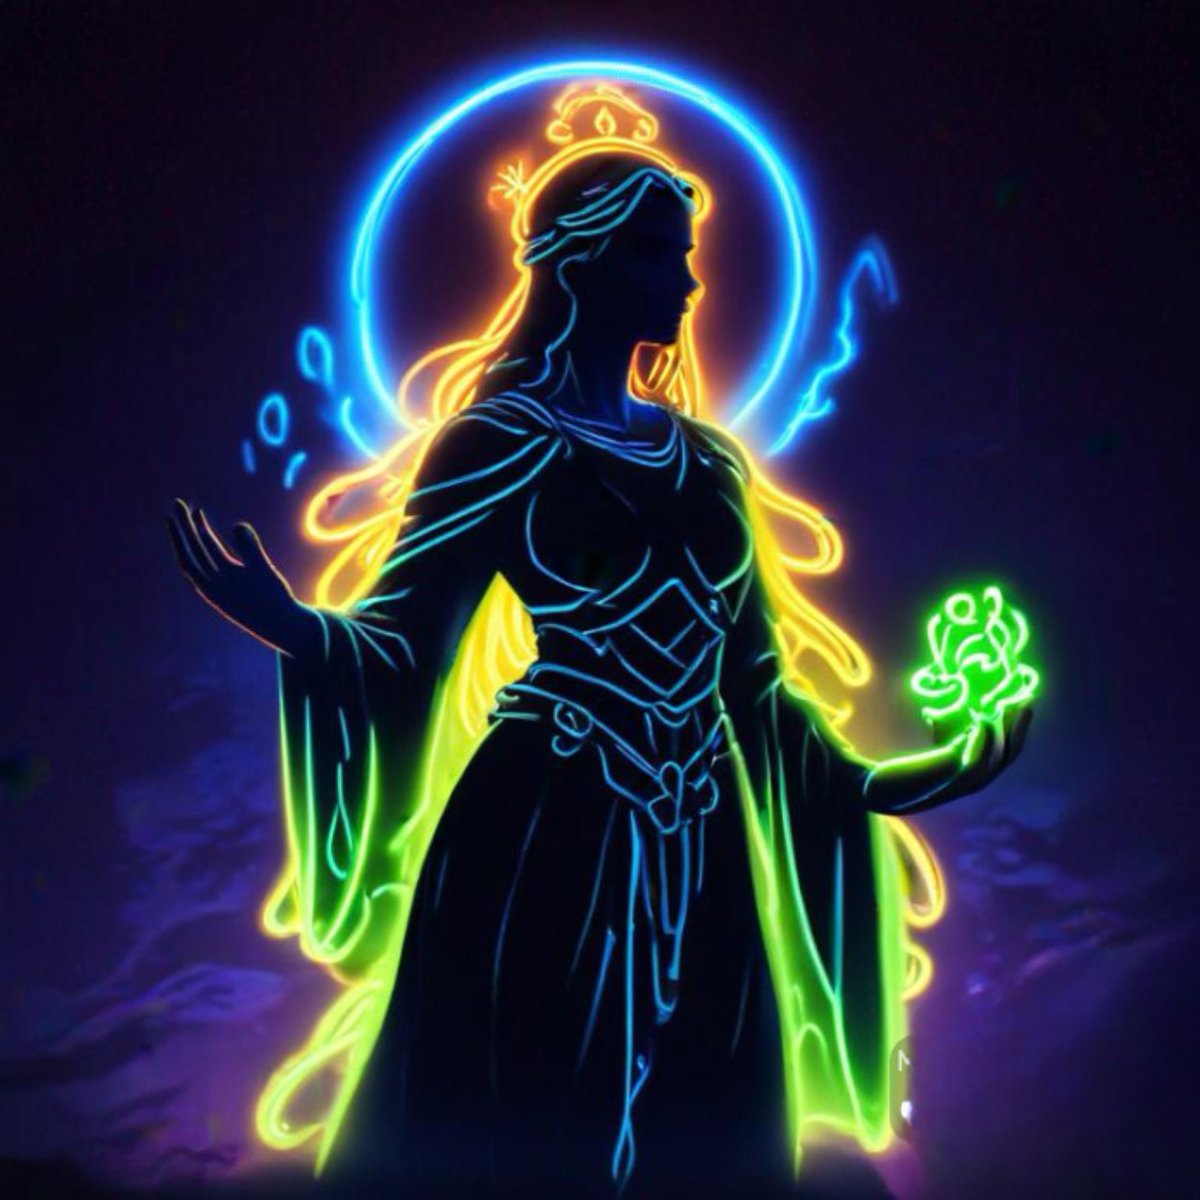 Frigg, the Norse Goddess of Matrimony and Motherhood, Protector of Women and Children, was also a powerful Volva, a practitioner of Sedir, a type of magic that allowed her to both foresee and alter the future . #Norsepagan #Frigg #Sedir #Volva #goddessworship #pagangods #Norse